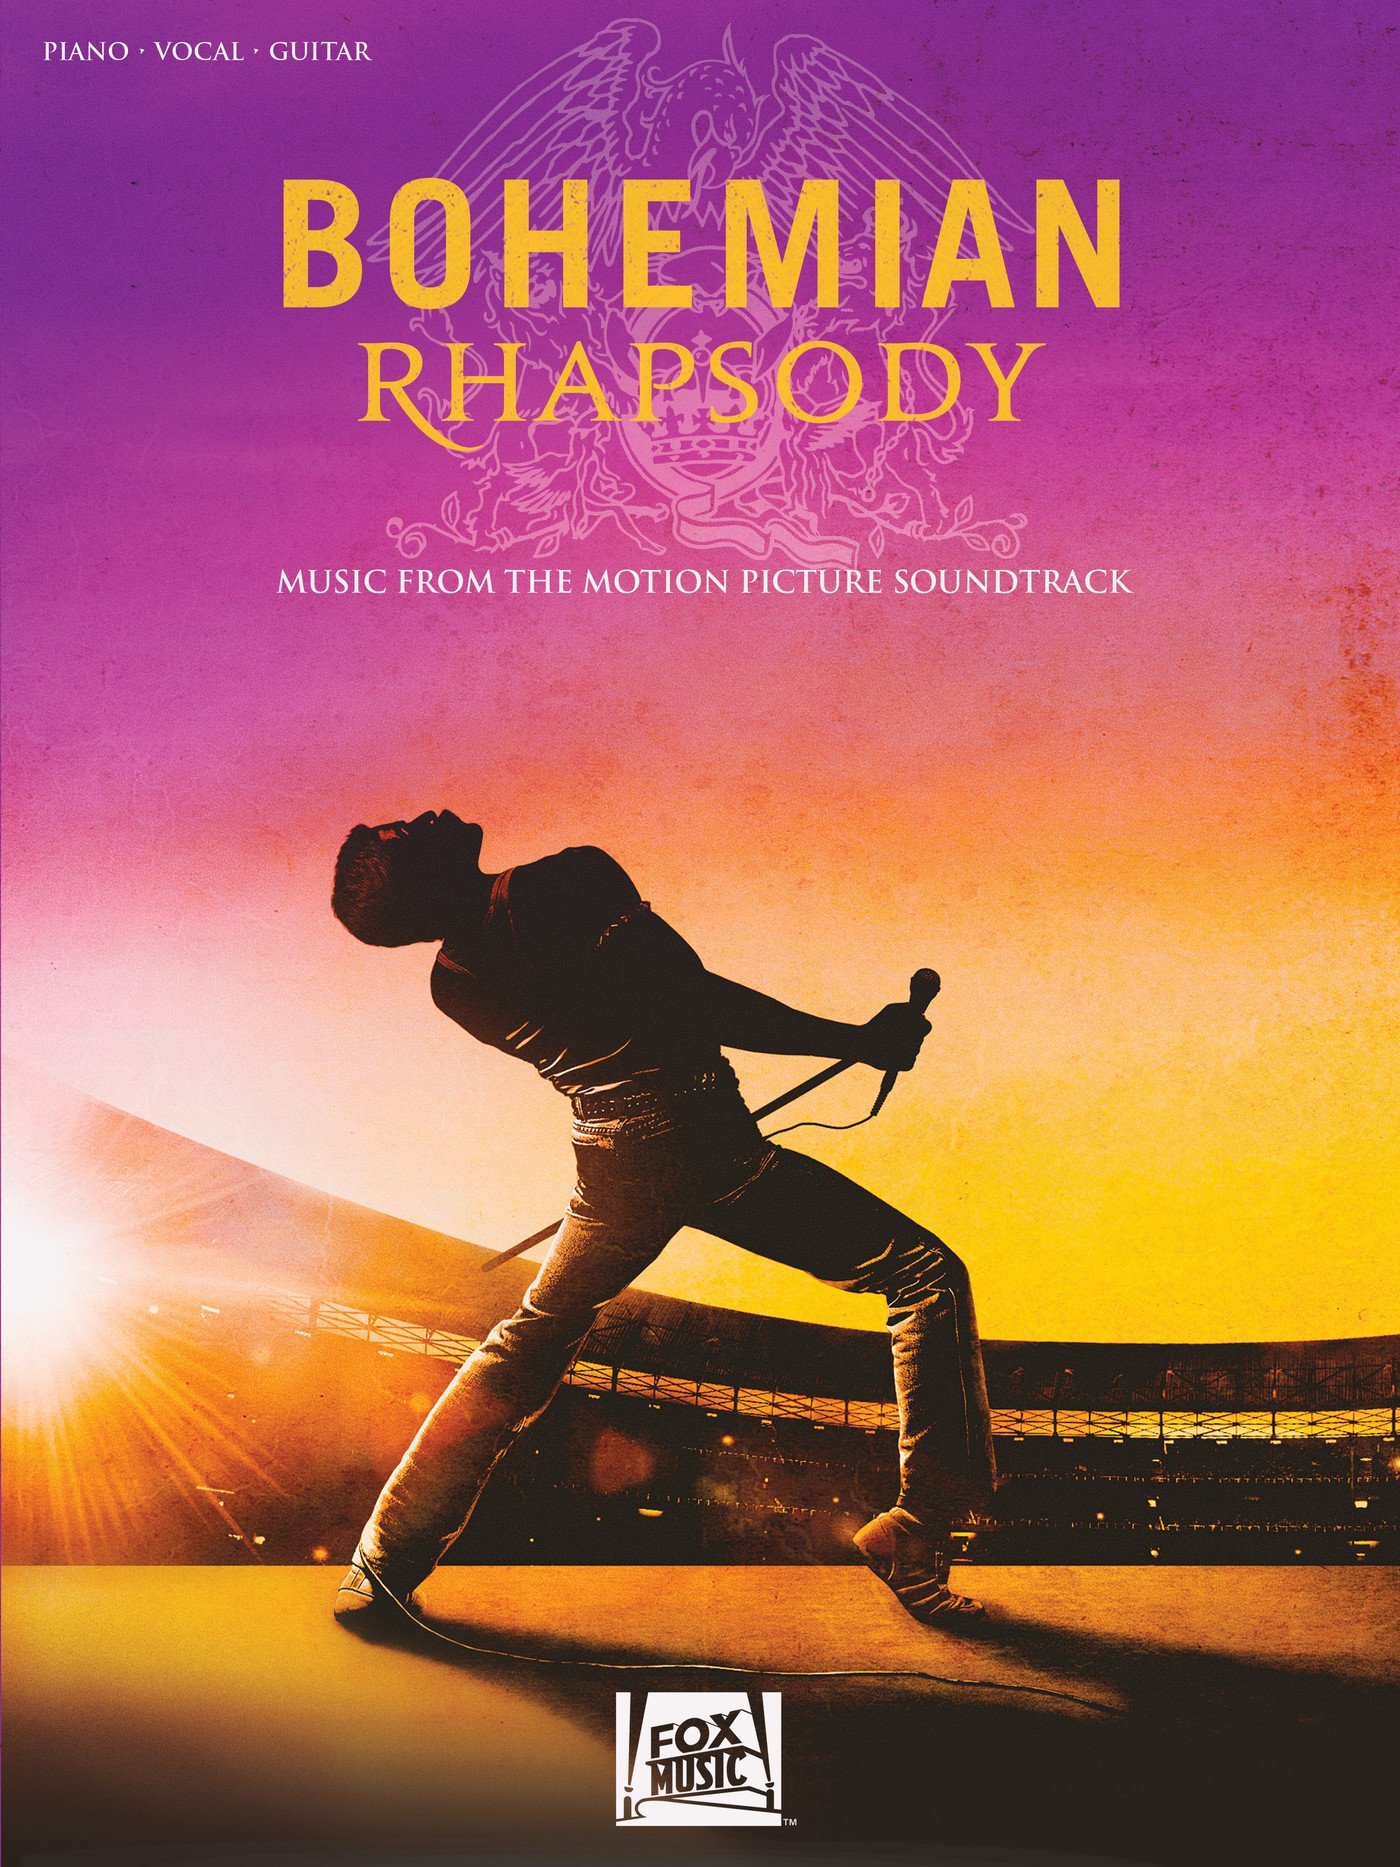 Download Bohemian Rhapsody Songbook: Music from the Motion Picture